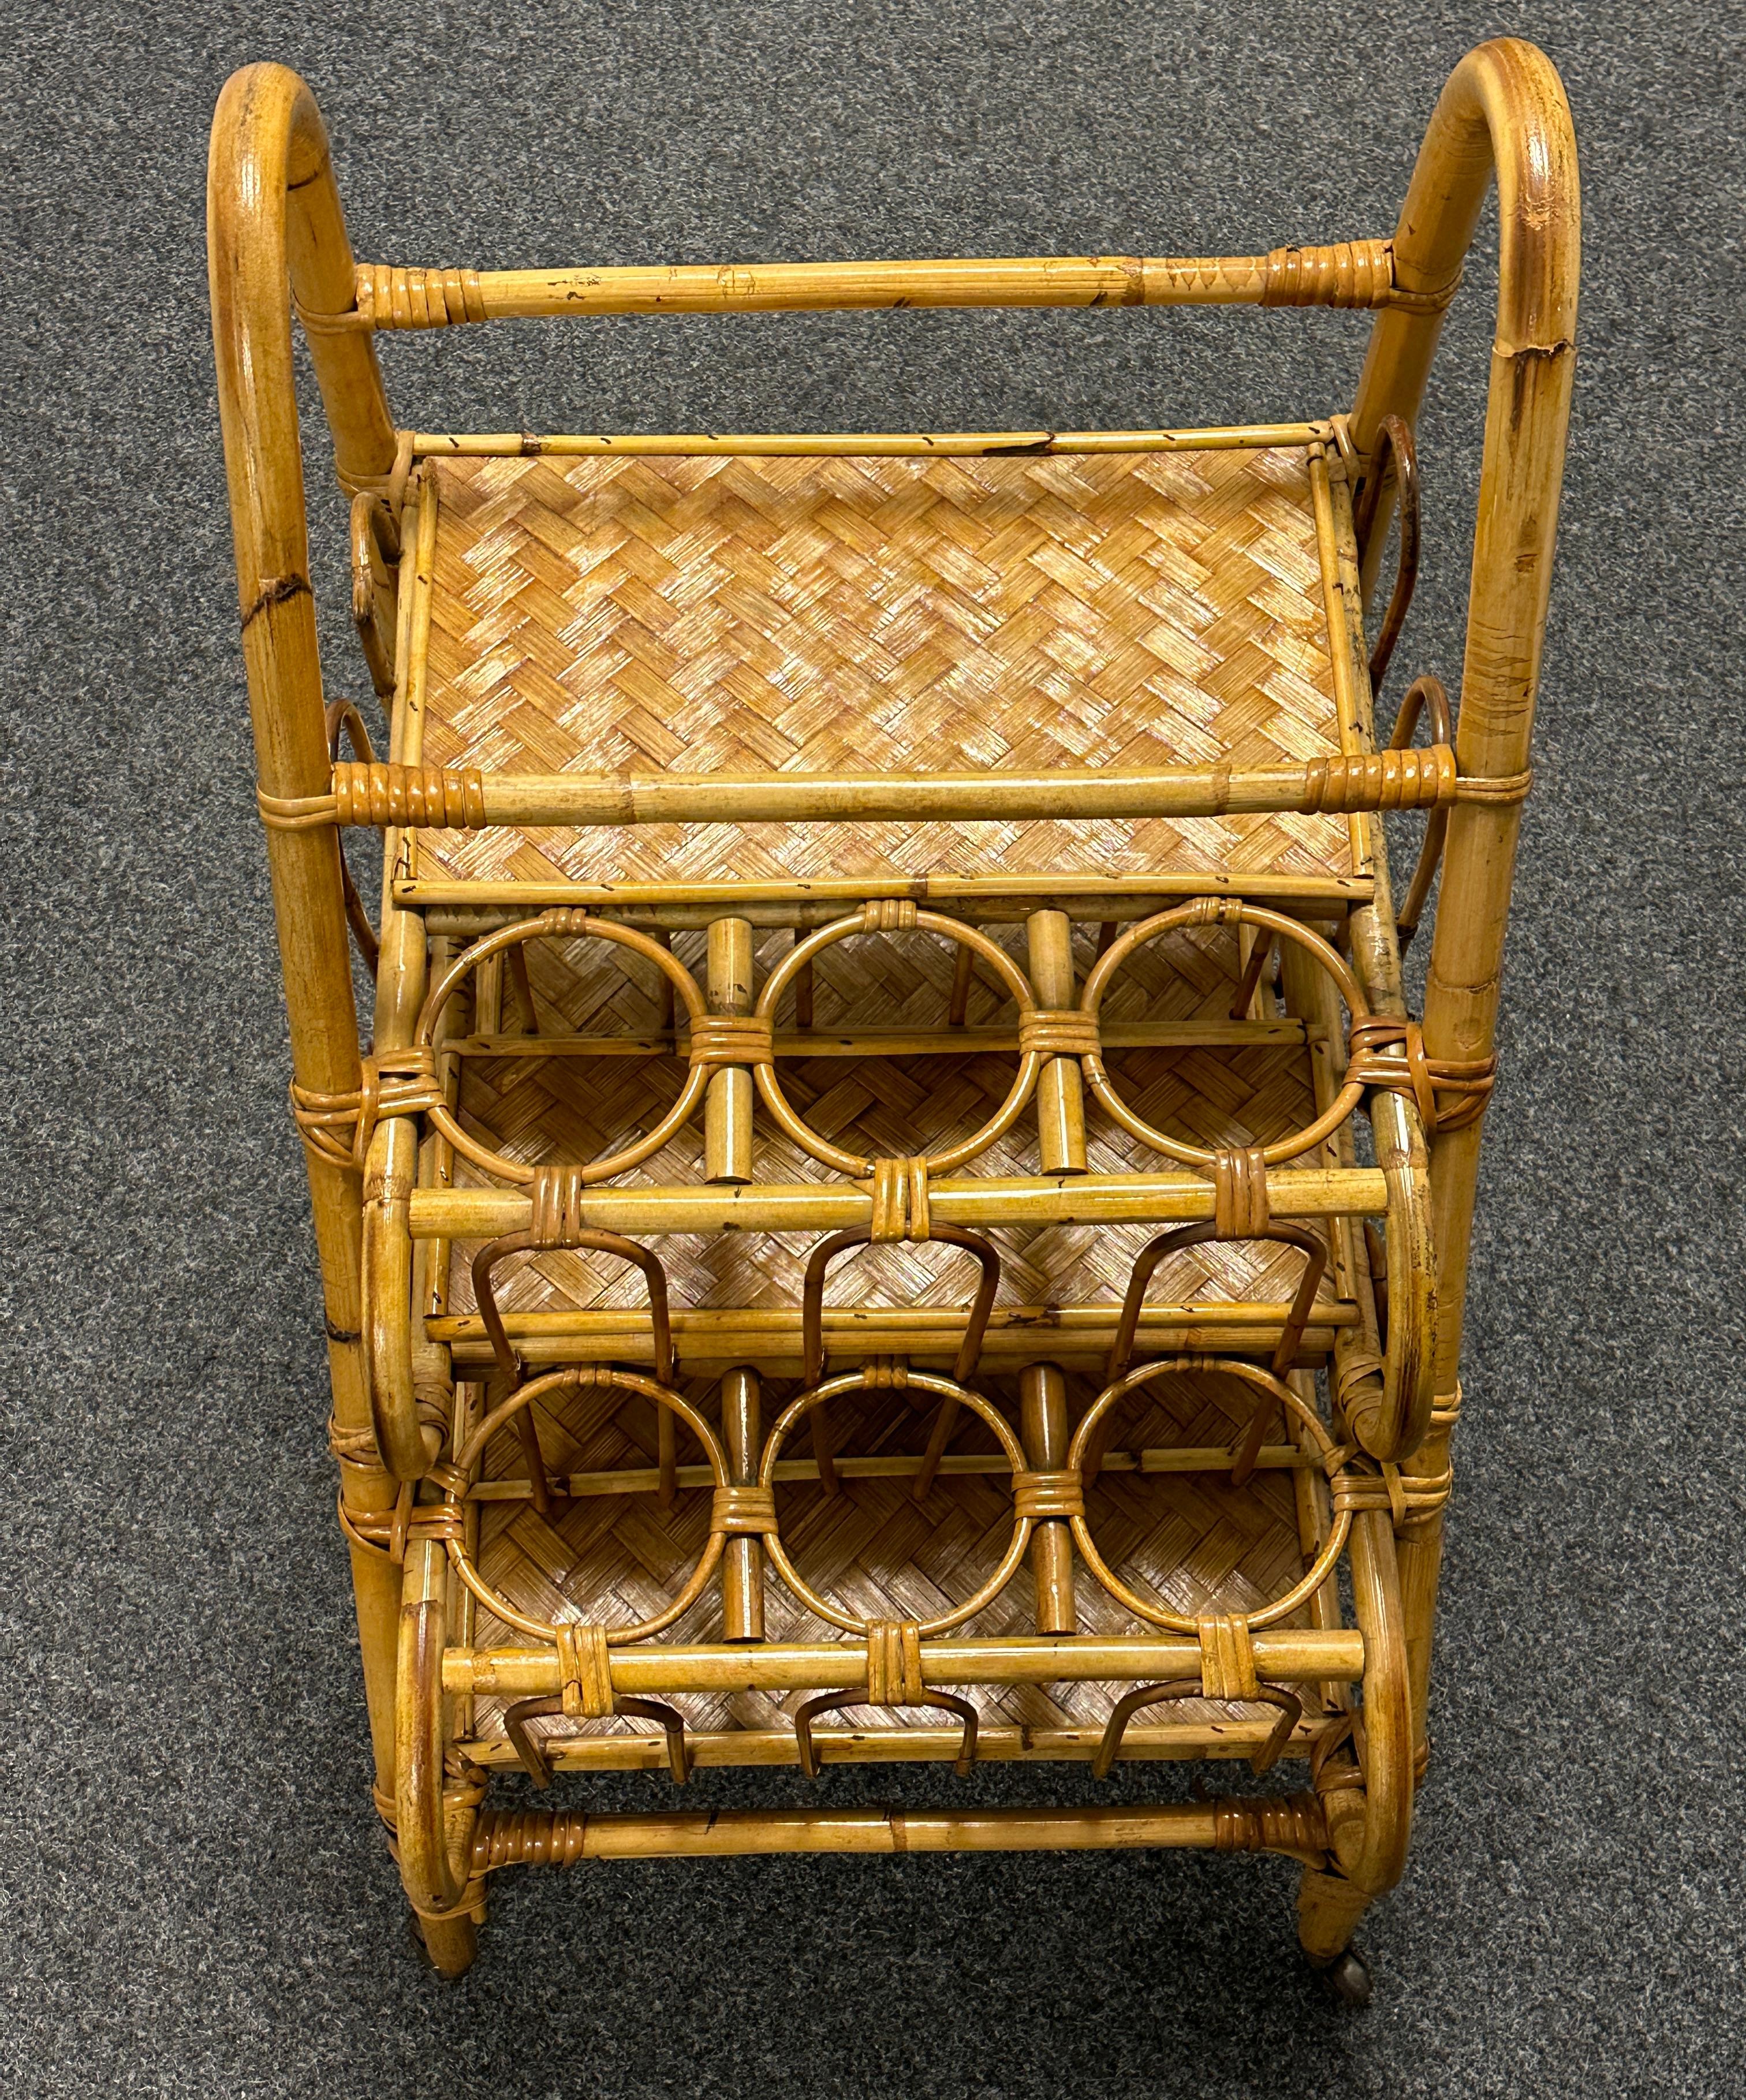 Vivai del Sud Bamboo Wicker Bar Cart Drinks Vine Bottle Stand, Vintage Italy For Sale 8